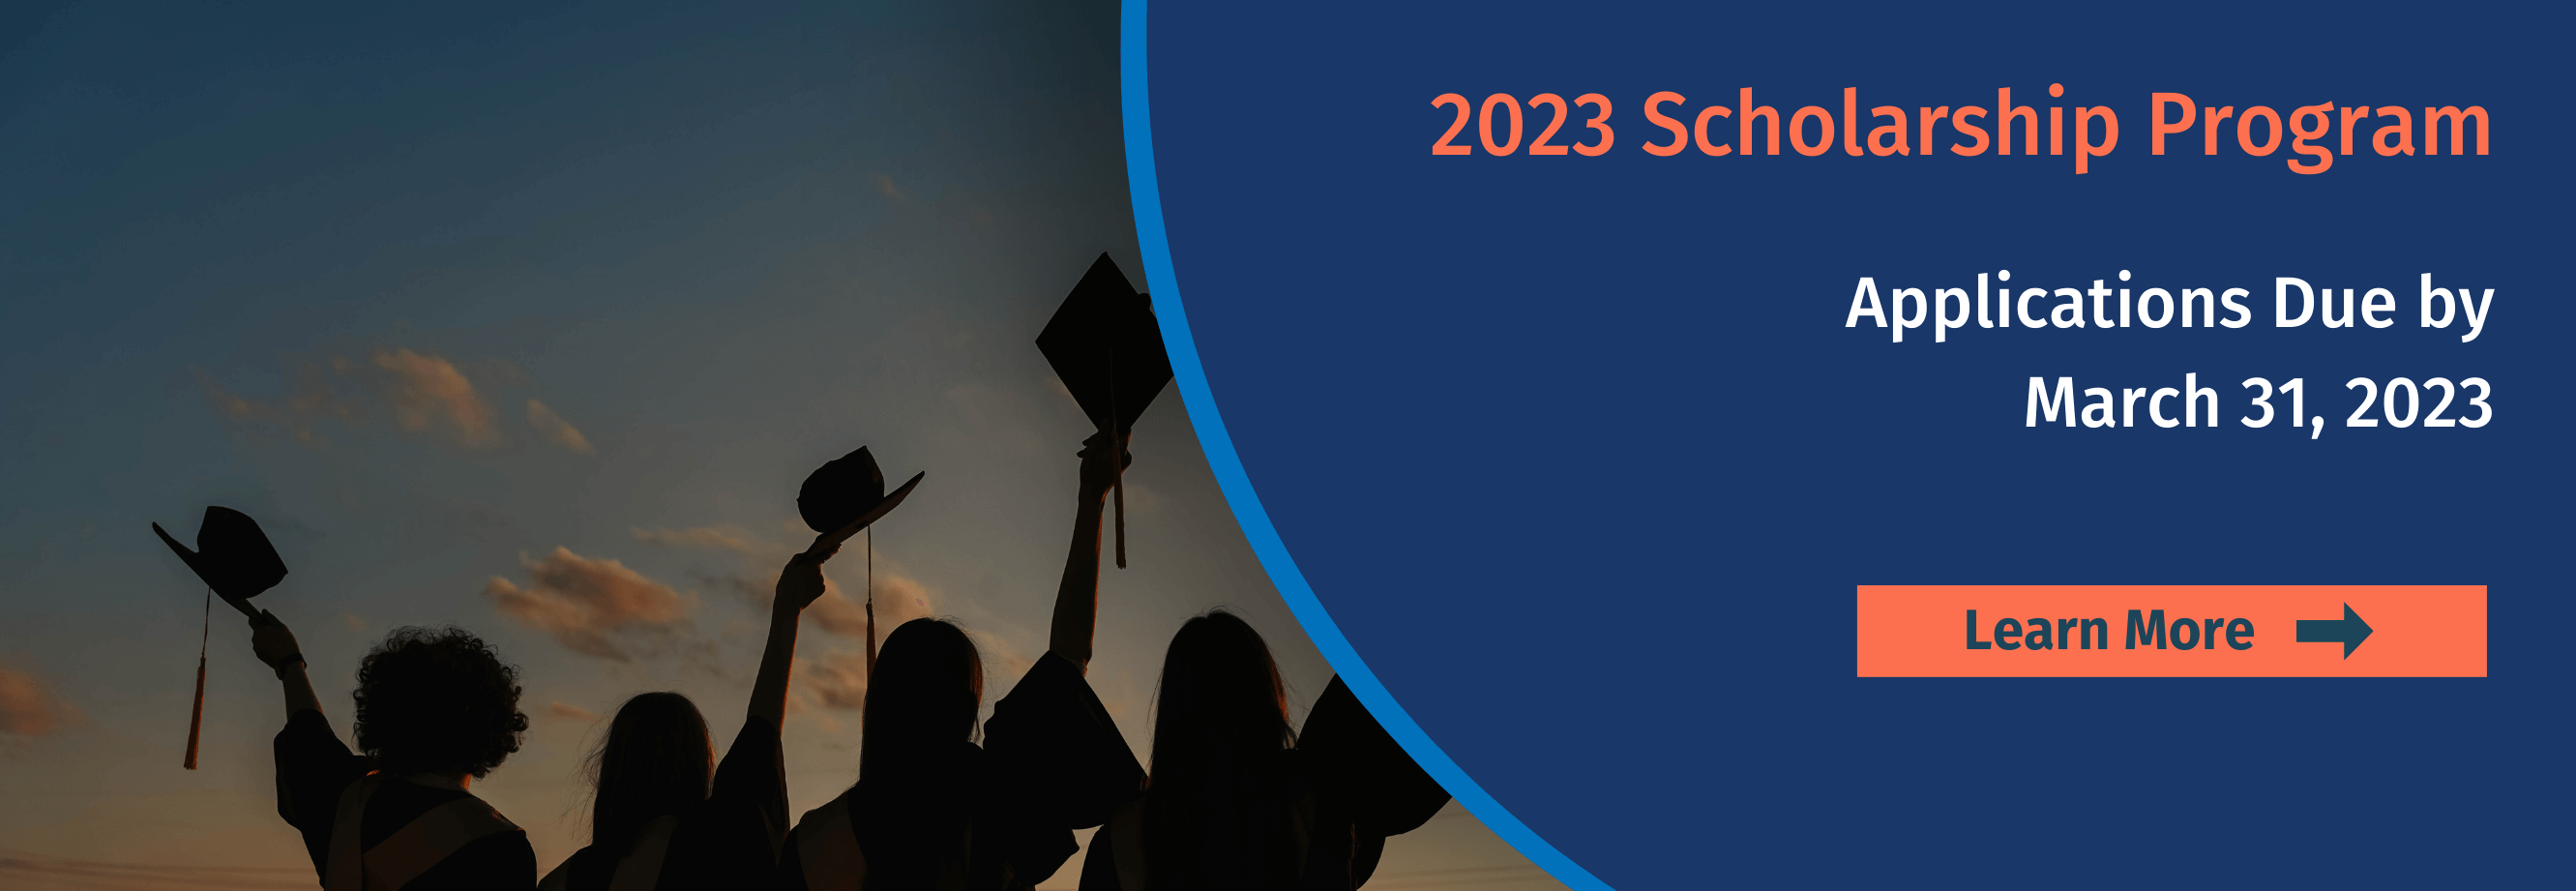 Image with text describing the 2023 scholarship program with applications due by March 31, 2023 and photo of graduates